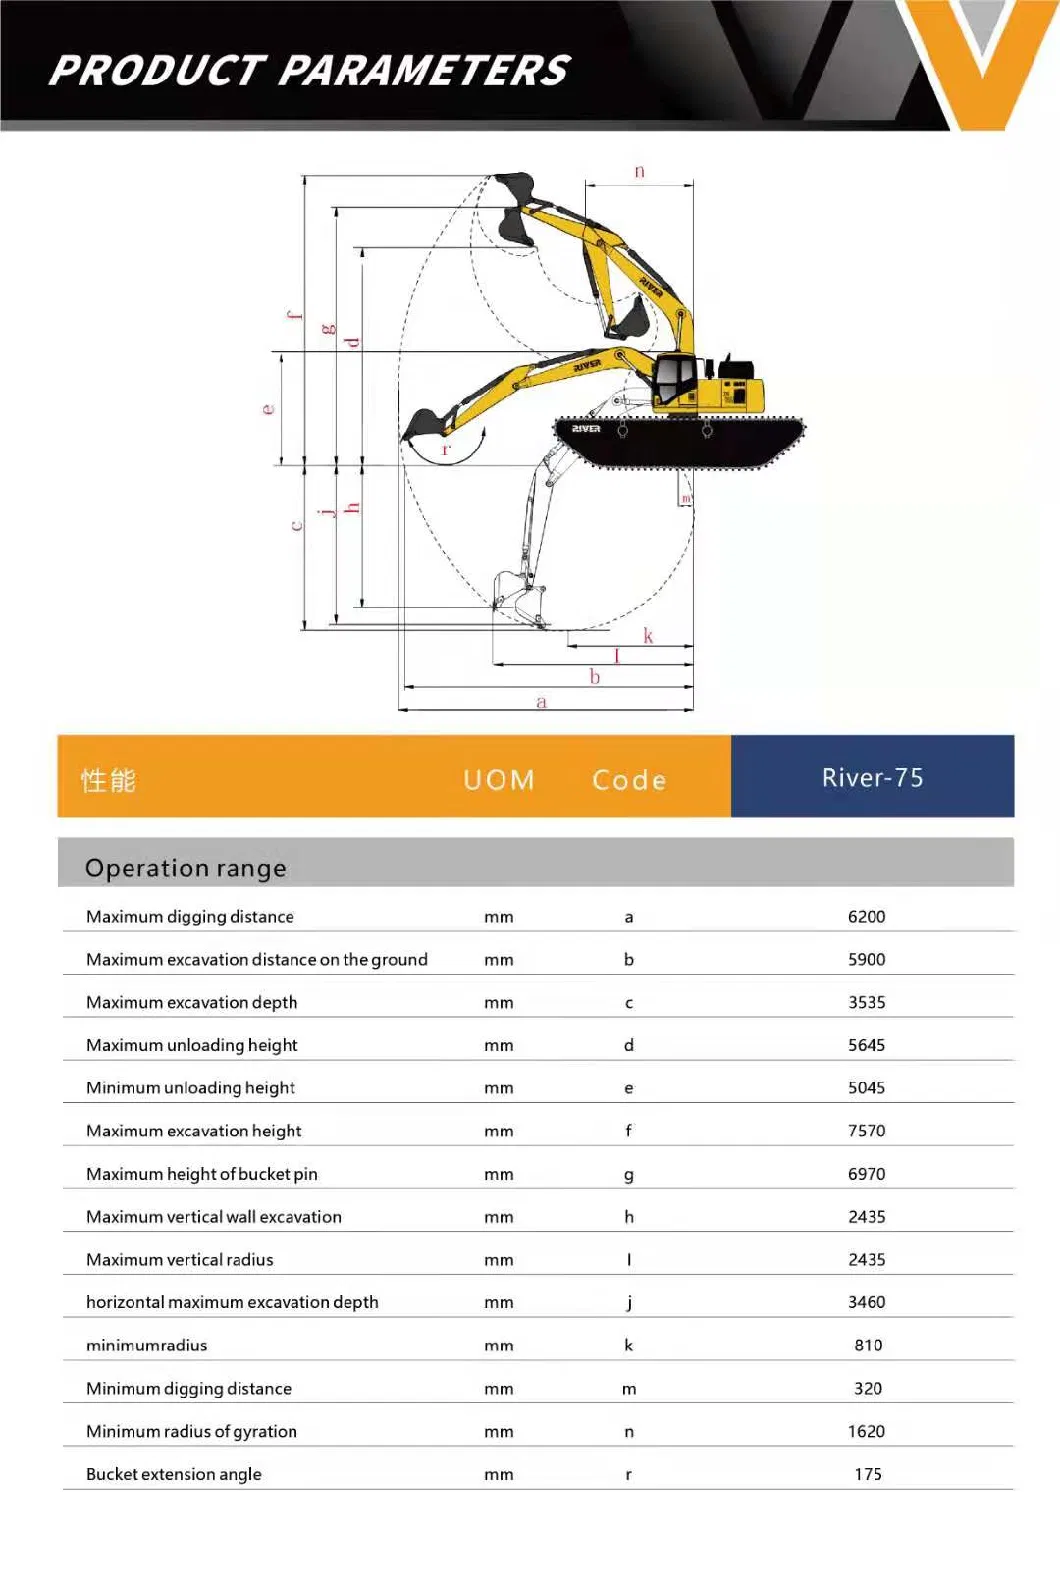 Swamp Marsh Buggy Hydraulic Towable Backhoe Amphibious Excavator Drilling Dredger Swamp Pump Excavator with Additional Side Pontoons